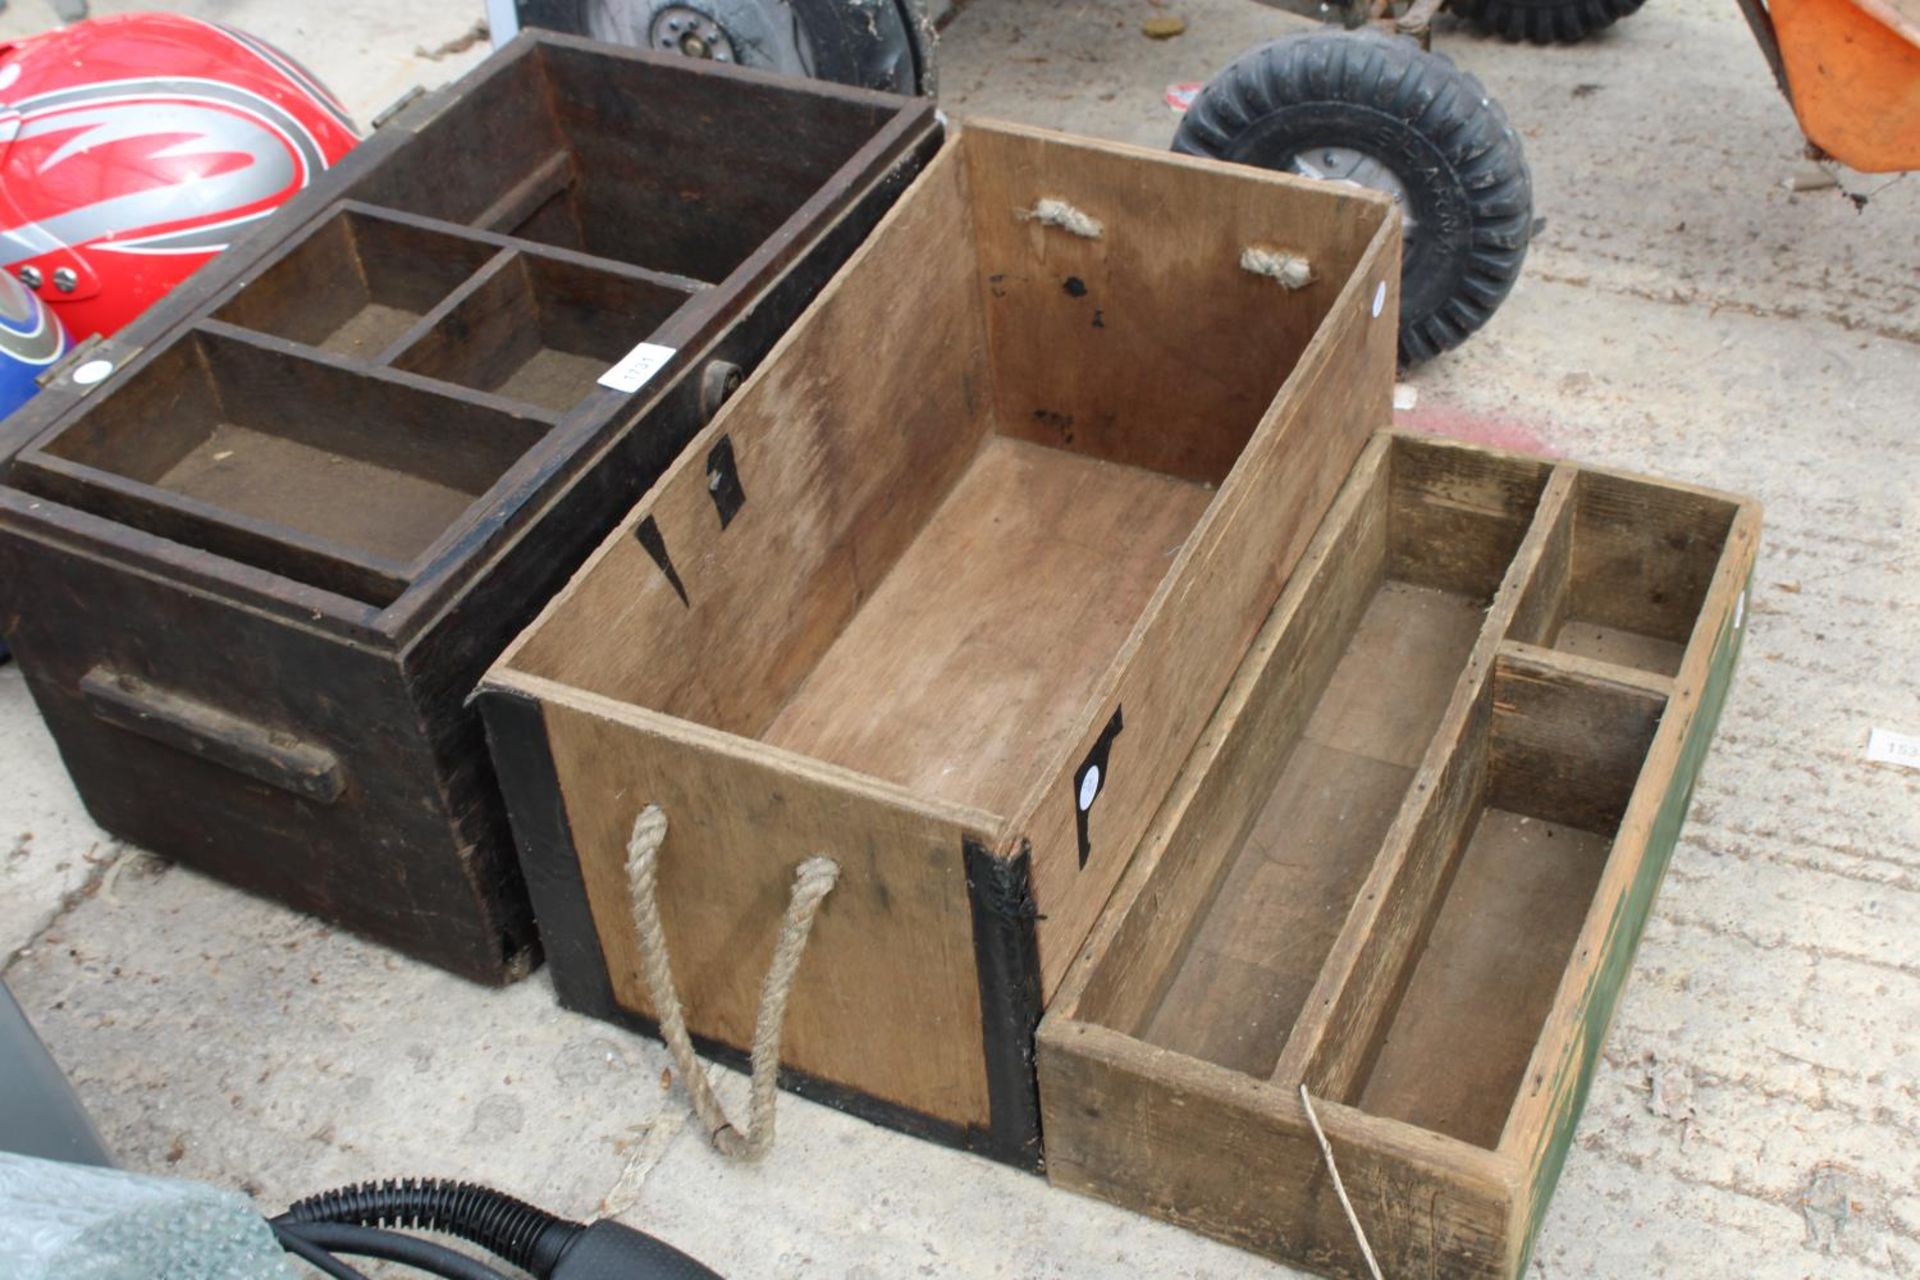 THREE VINTAGE WOODEN CRATES AND TOOL CHESTS - Image 2 of 2